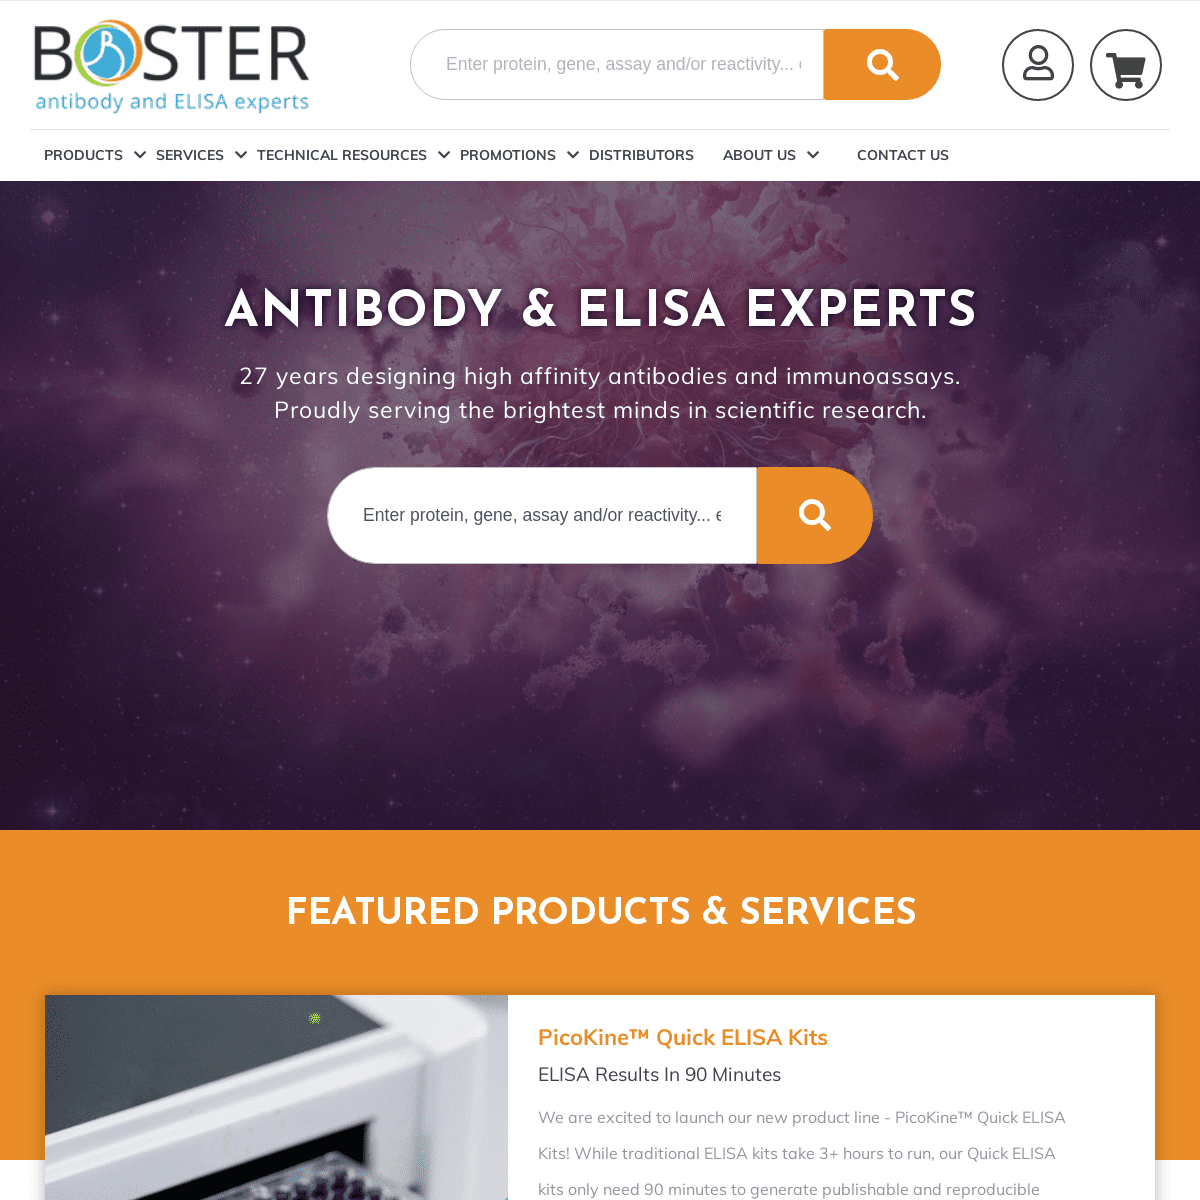 A complete backup of https://bosterbio.com